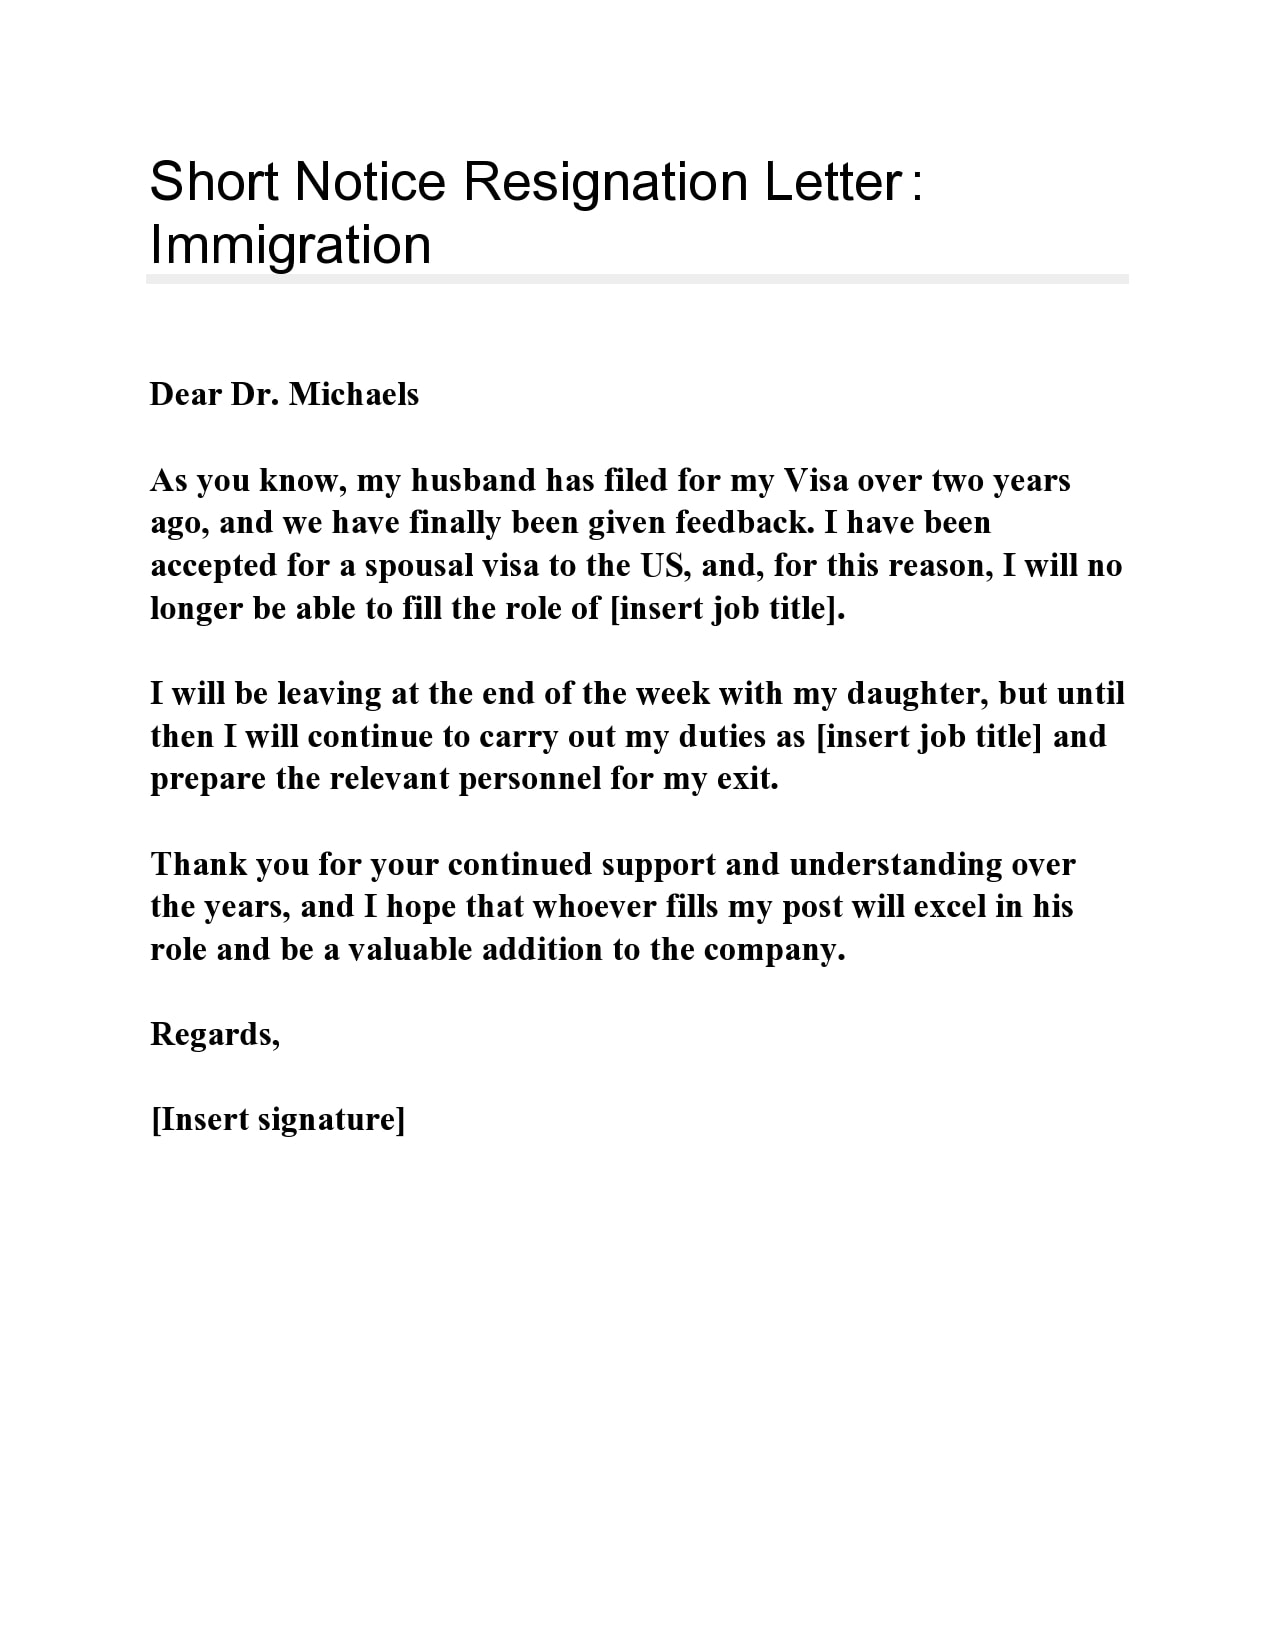 30+ Short Notice Resignation Letters (FREE) TemplateArchive